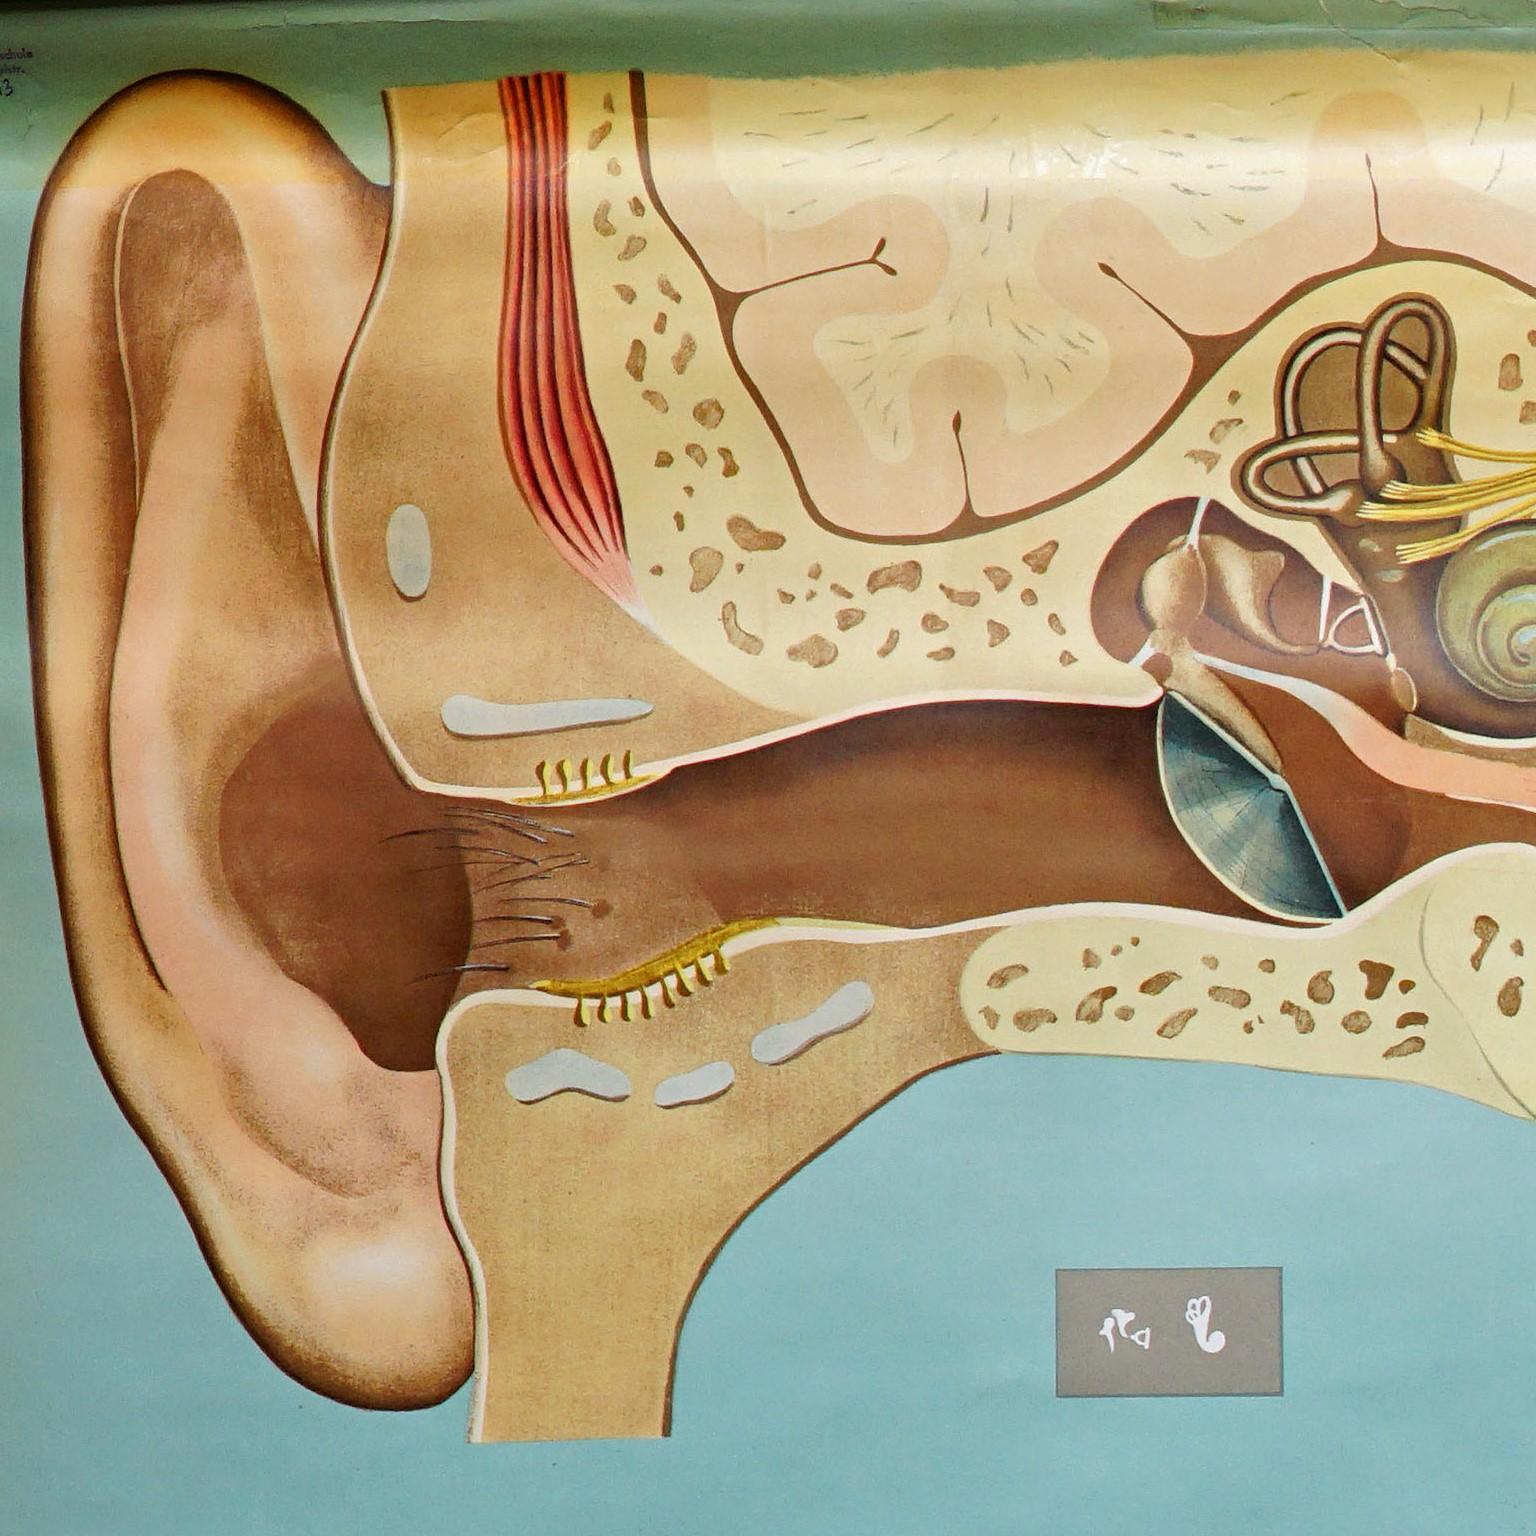 A large medical wallchart illustrating the human sense of hearing and the sense of balance (equilibrum organ). Published by the Lehrmittelverlag Wilhelm Hagemann, Duesseldorf. Colorful print on paper reinforced with canvas.
Measurements:
Width 165